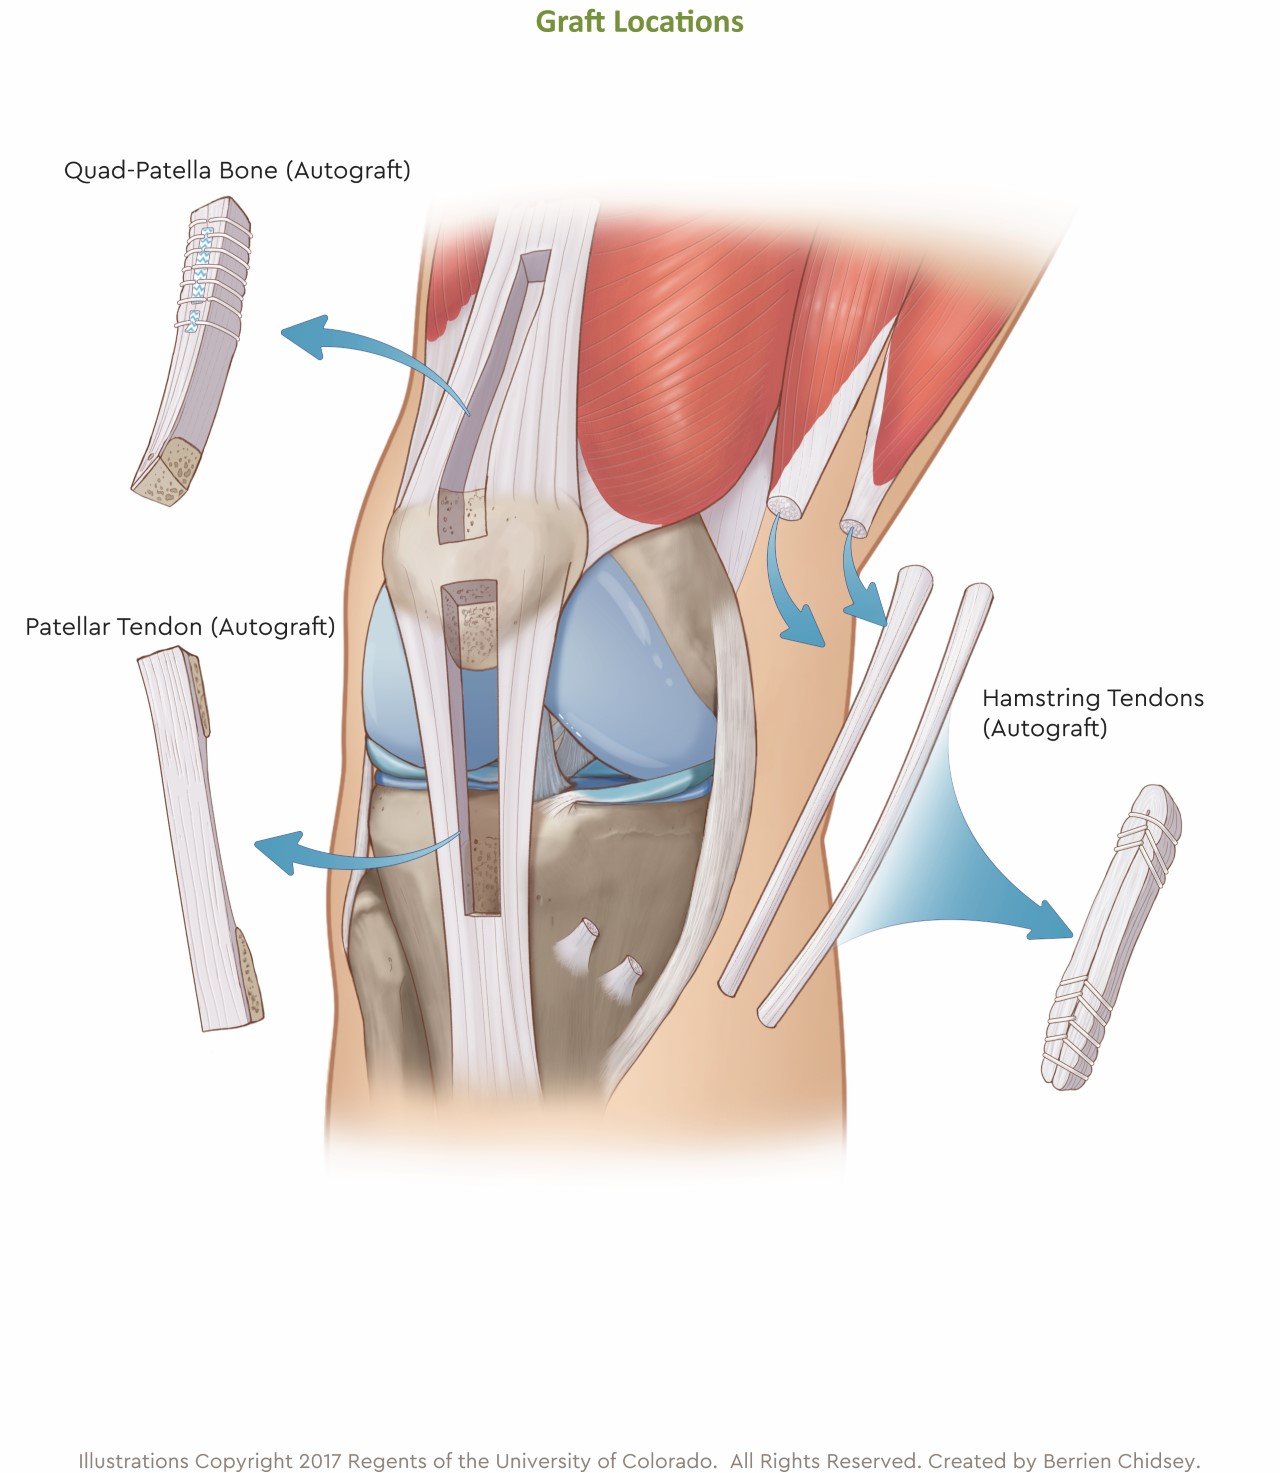 Illustration showing that an ACL graft can come from the quad-patella bone above the knee, the patellar tendon below the knee or the hamstring tendons on the side of the knee.